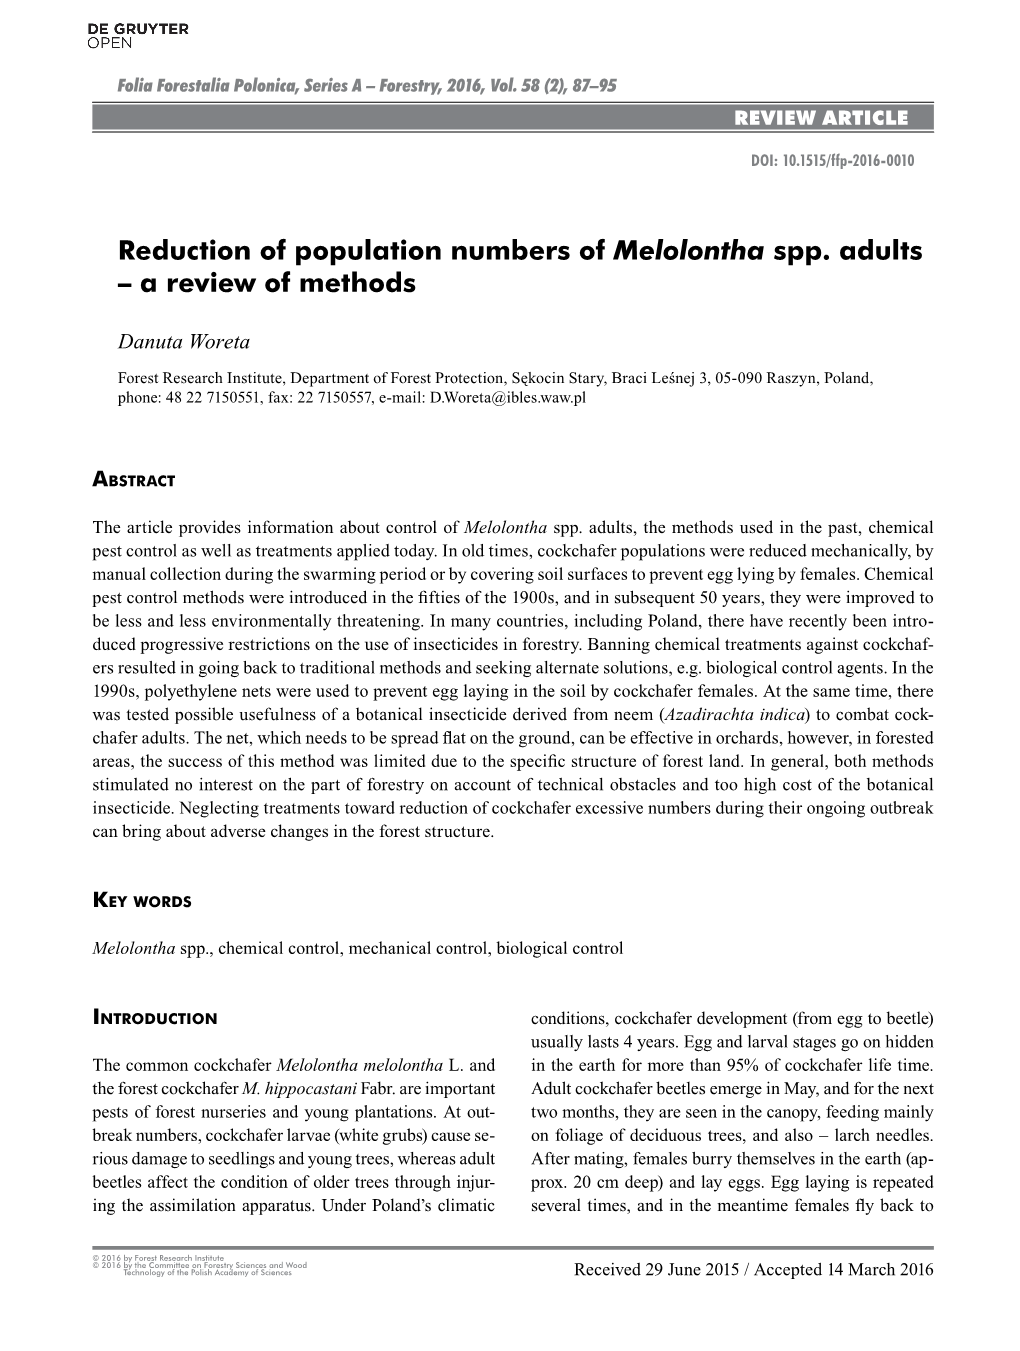 Reduction of Population Numbers of Melolontha Spp. Adults – a Review of Methods